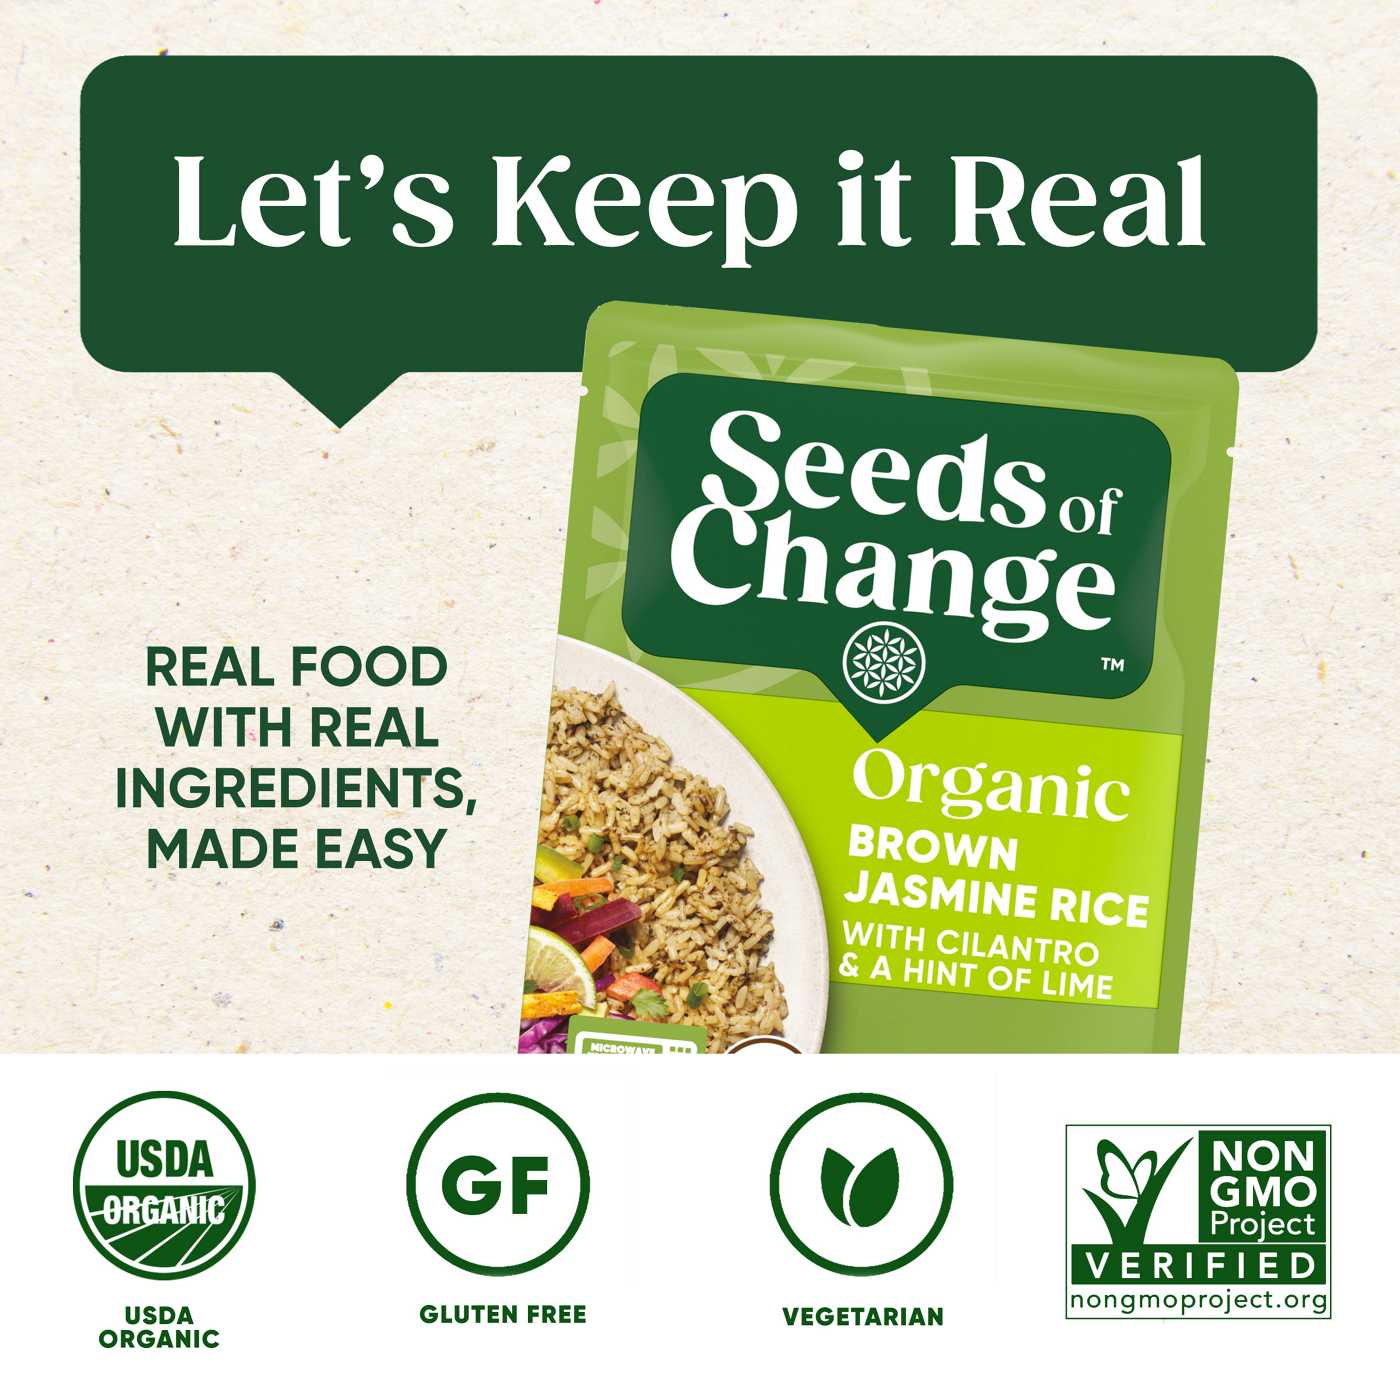 Seeds of Change Organic Brown Jasmine Rice with Cilantro Lime; image 6 of 9